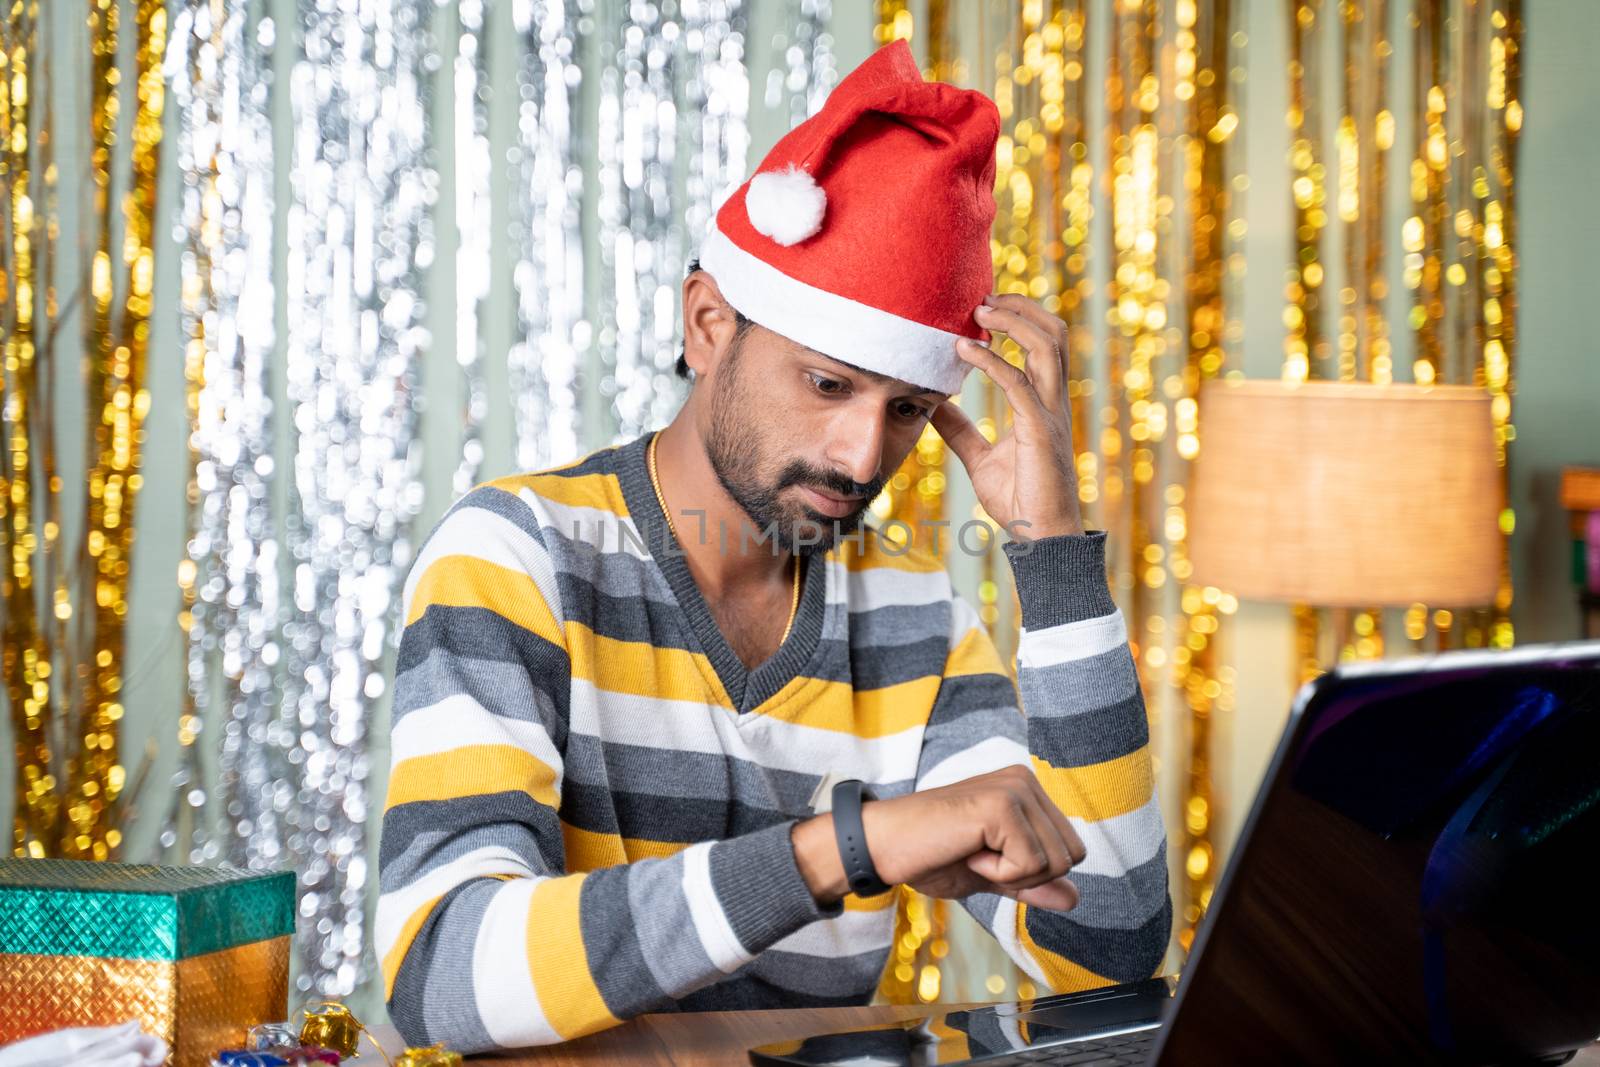 young man with busy working on laptop and watching as late night time during Christmas or new year eve - Concept of work from home during holiday season due to coronavirus or covid-19 pandemic by lakshmiprasad.maski@gmai.com